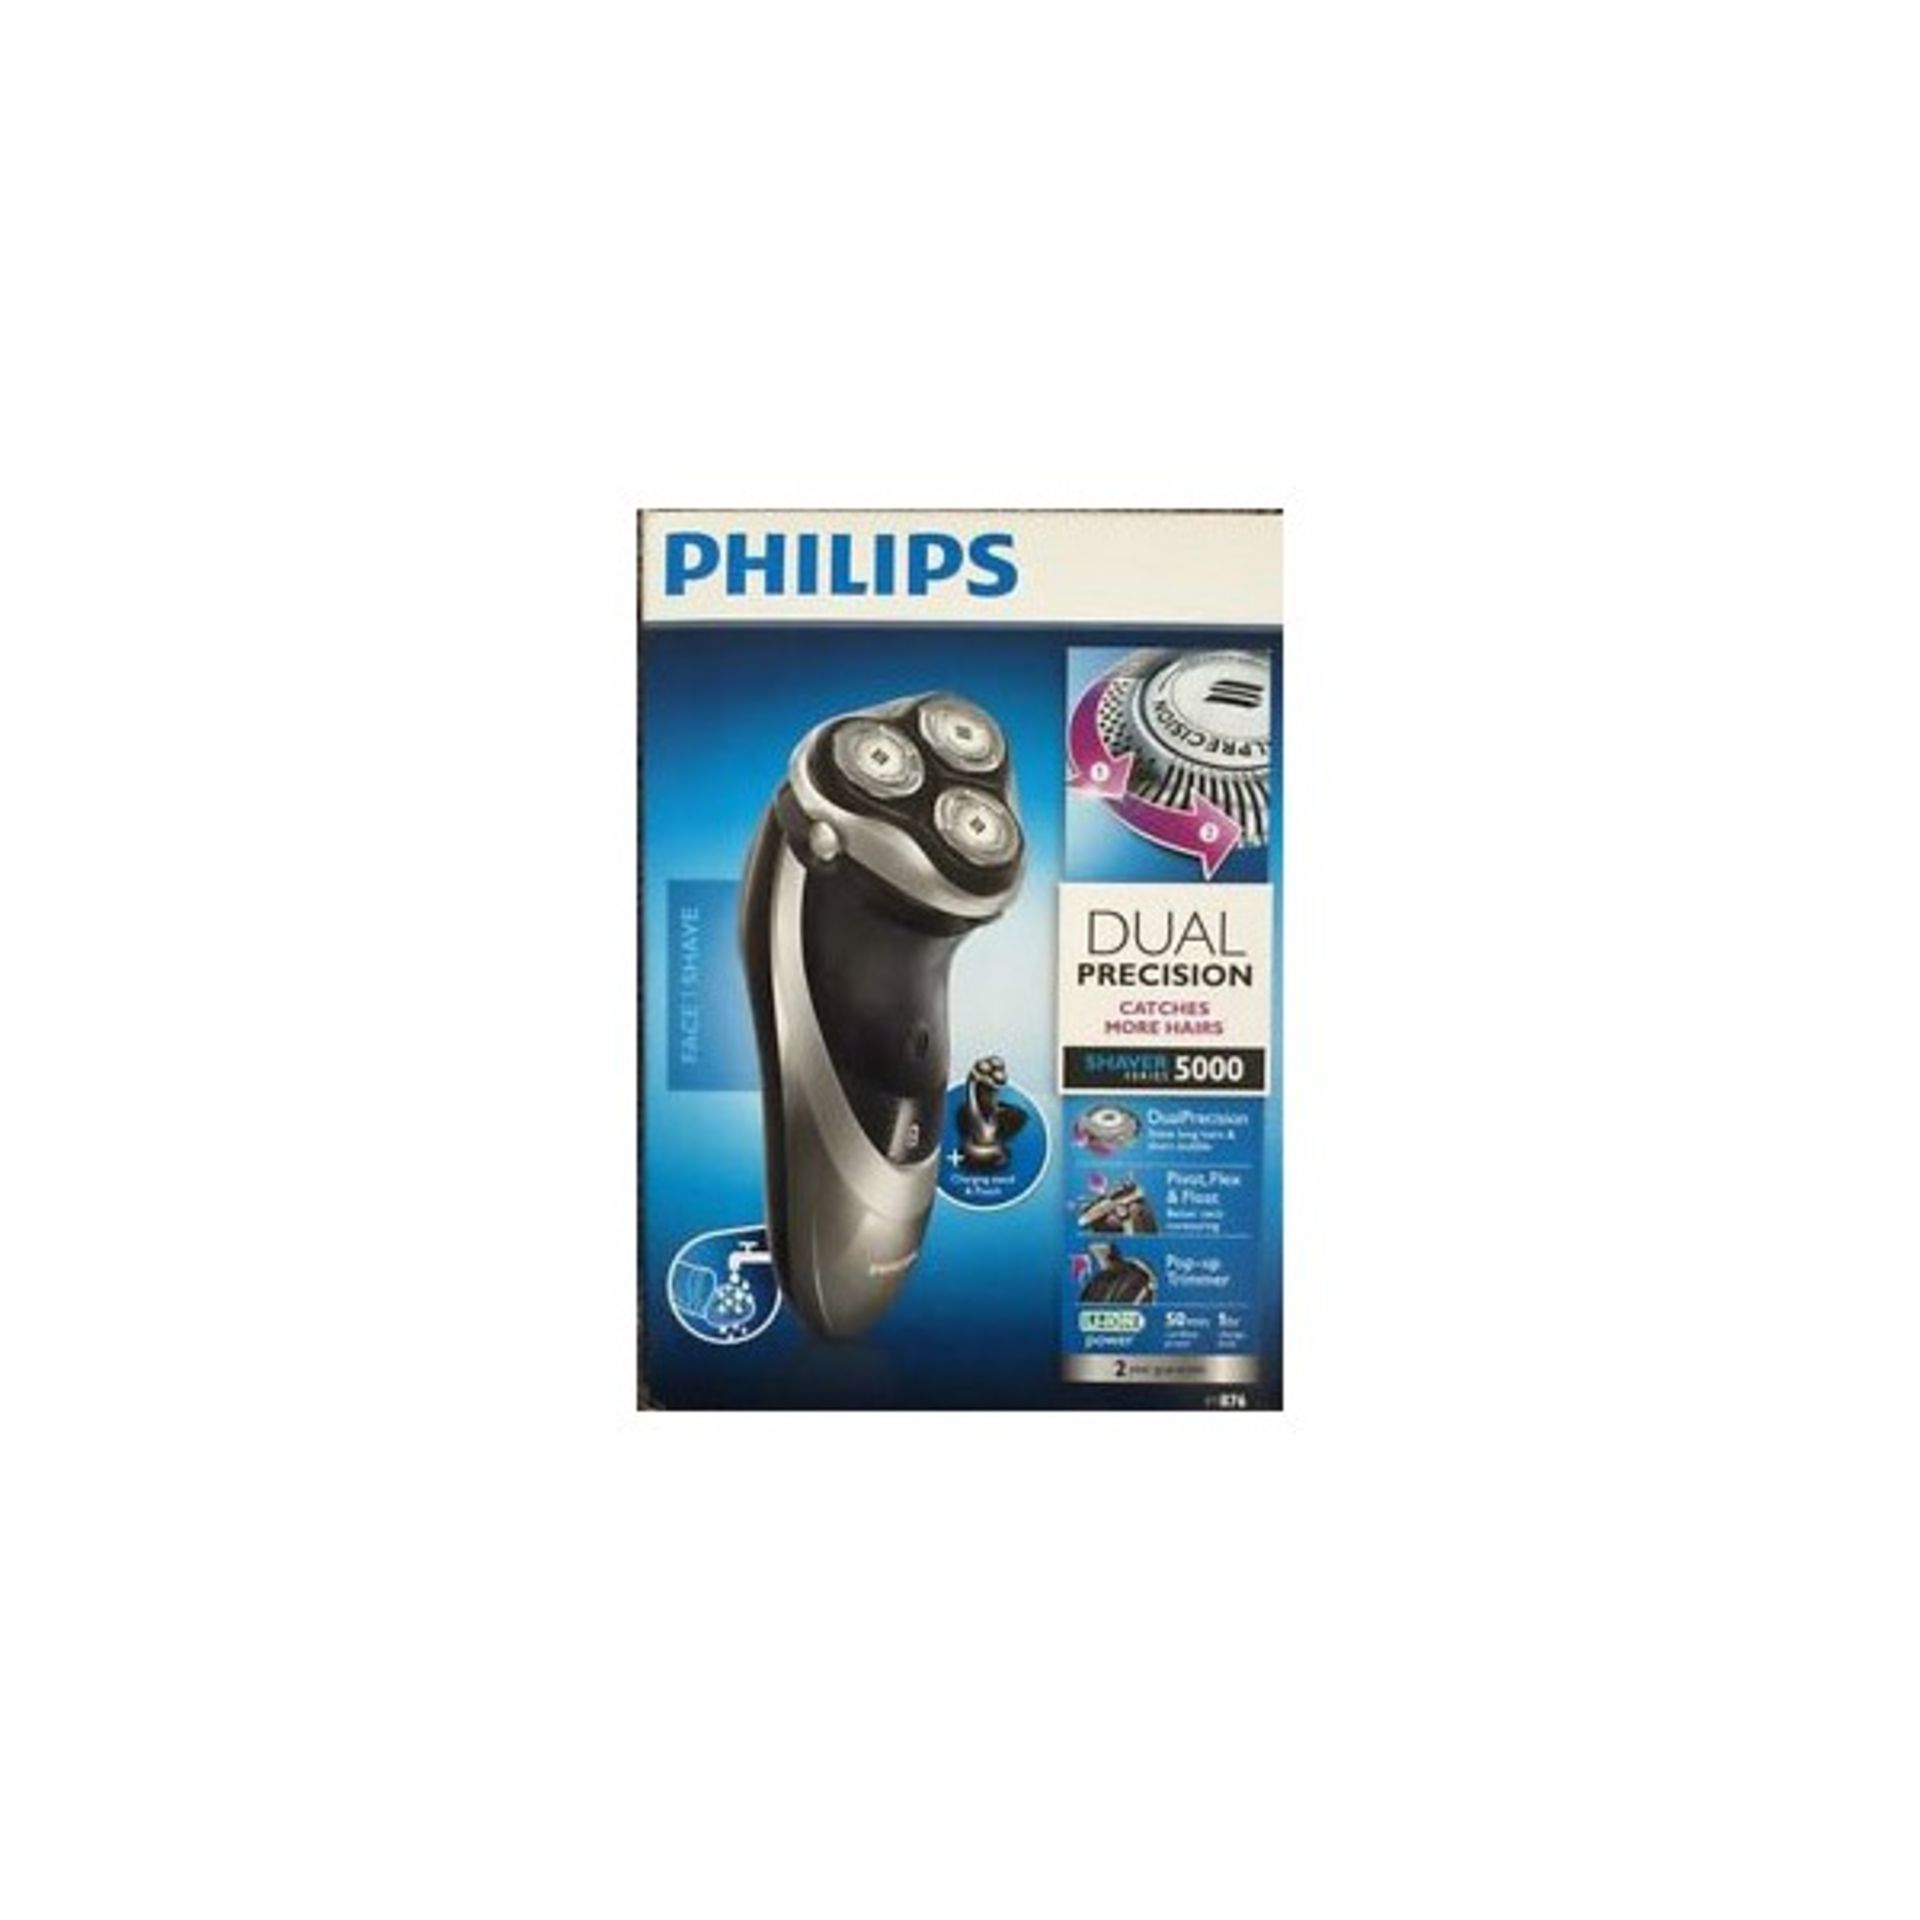 V *TRADE QTY* Brand New Philips Shaver Series 5000 - 3 Head Dual Precision Dry Electric Shaver -